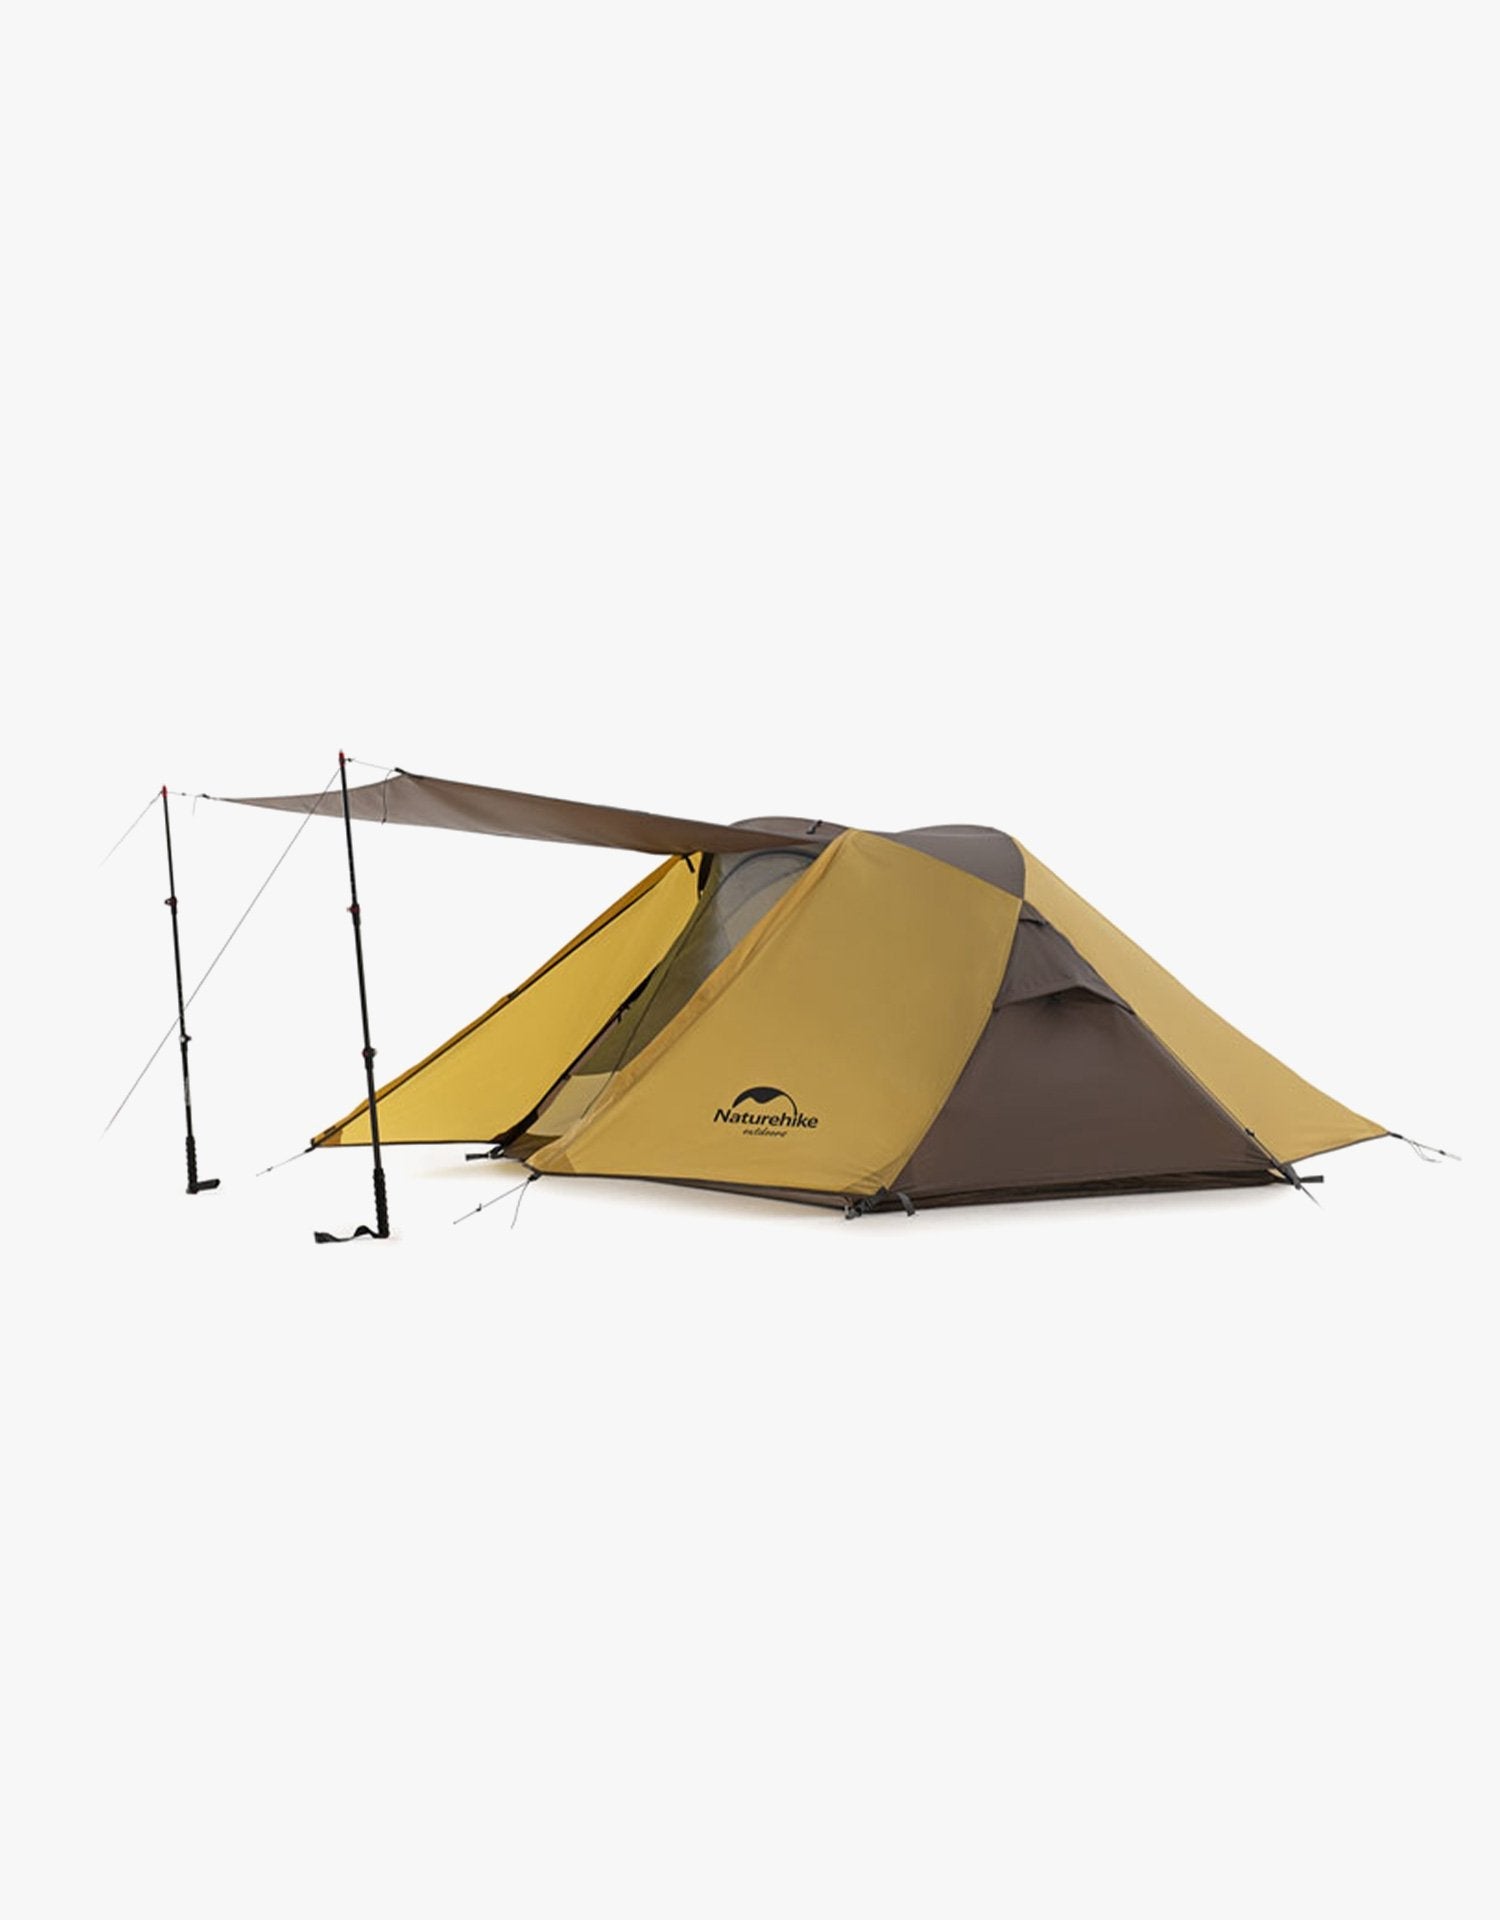 Naturehike Butterfly Cross Double Hall Tent NH21YW132